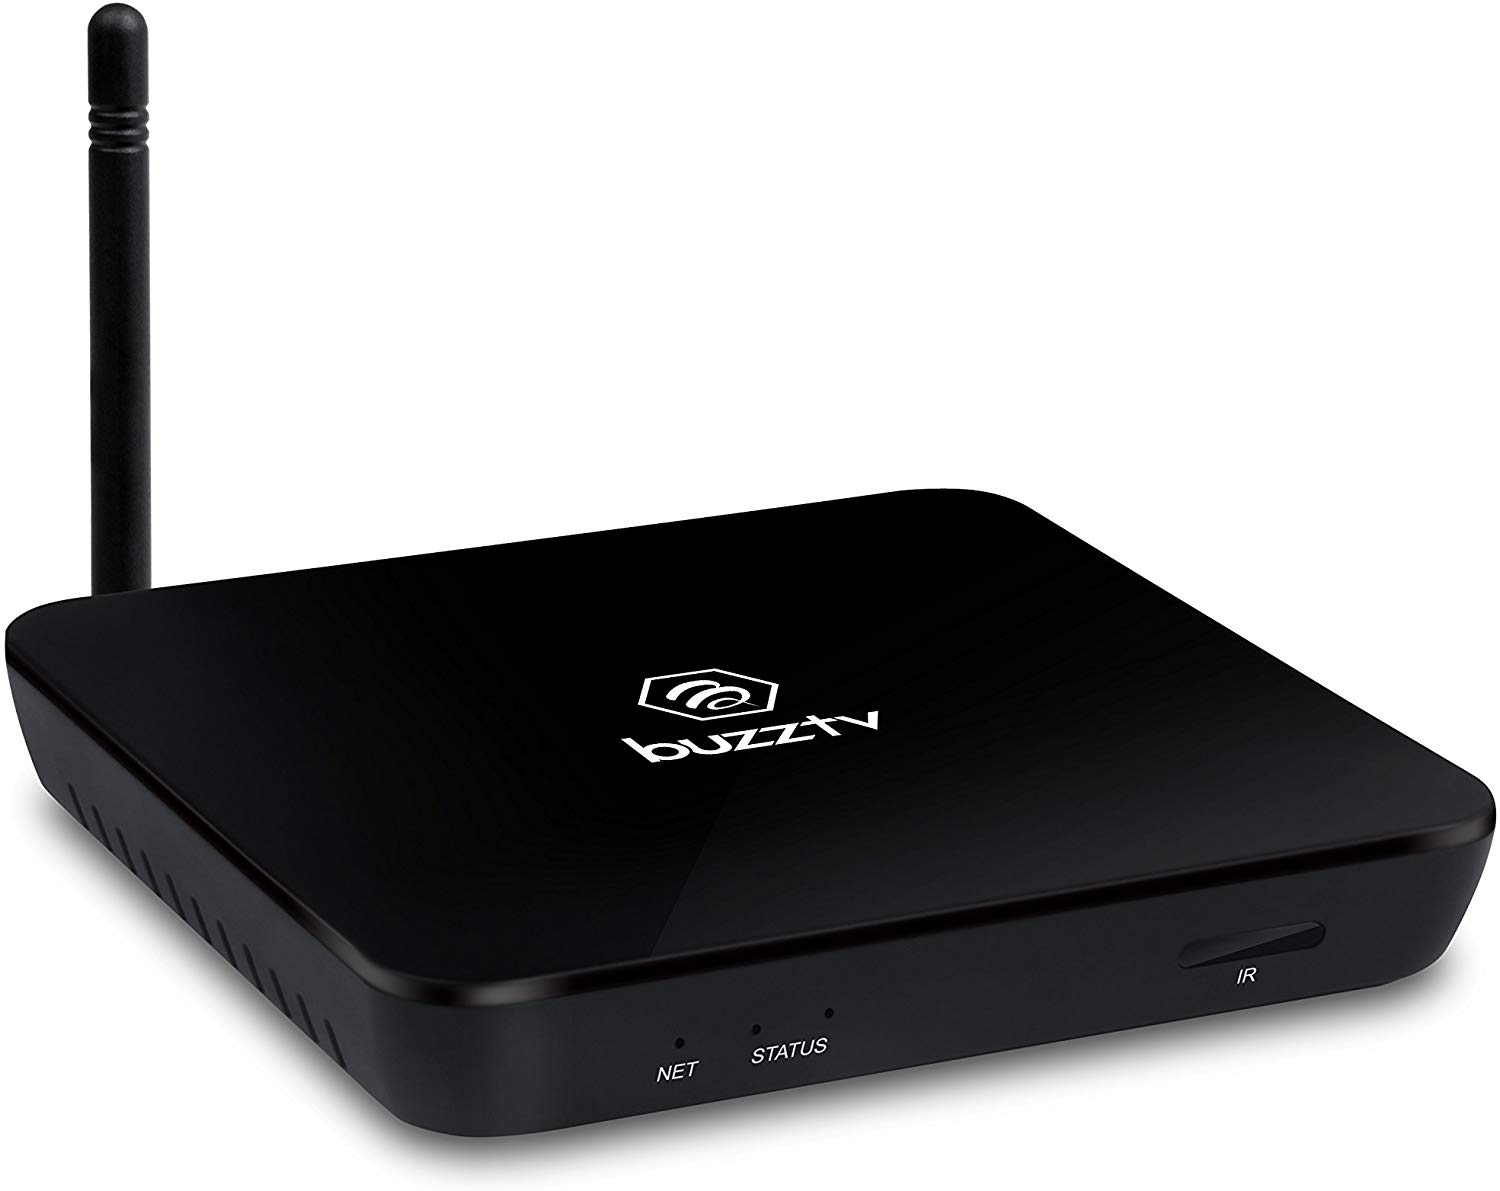 BuzzTV XPL3000 Android Based IPTV Set-top-Box and Streaming Media Player (Black)